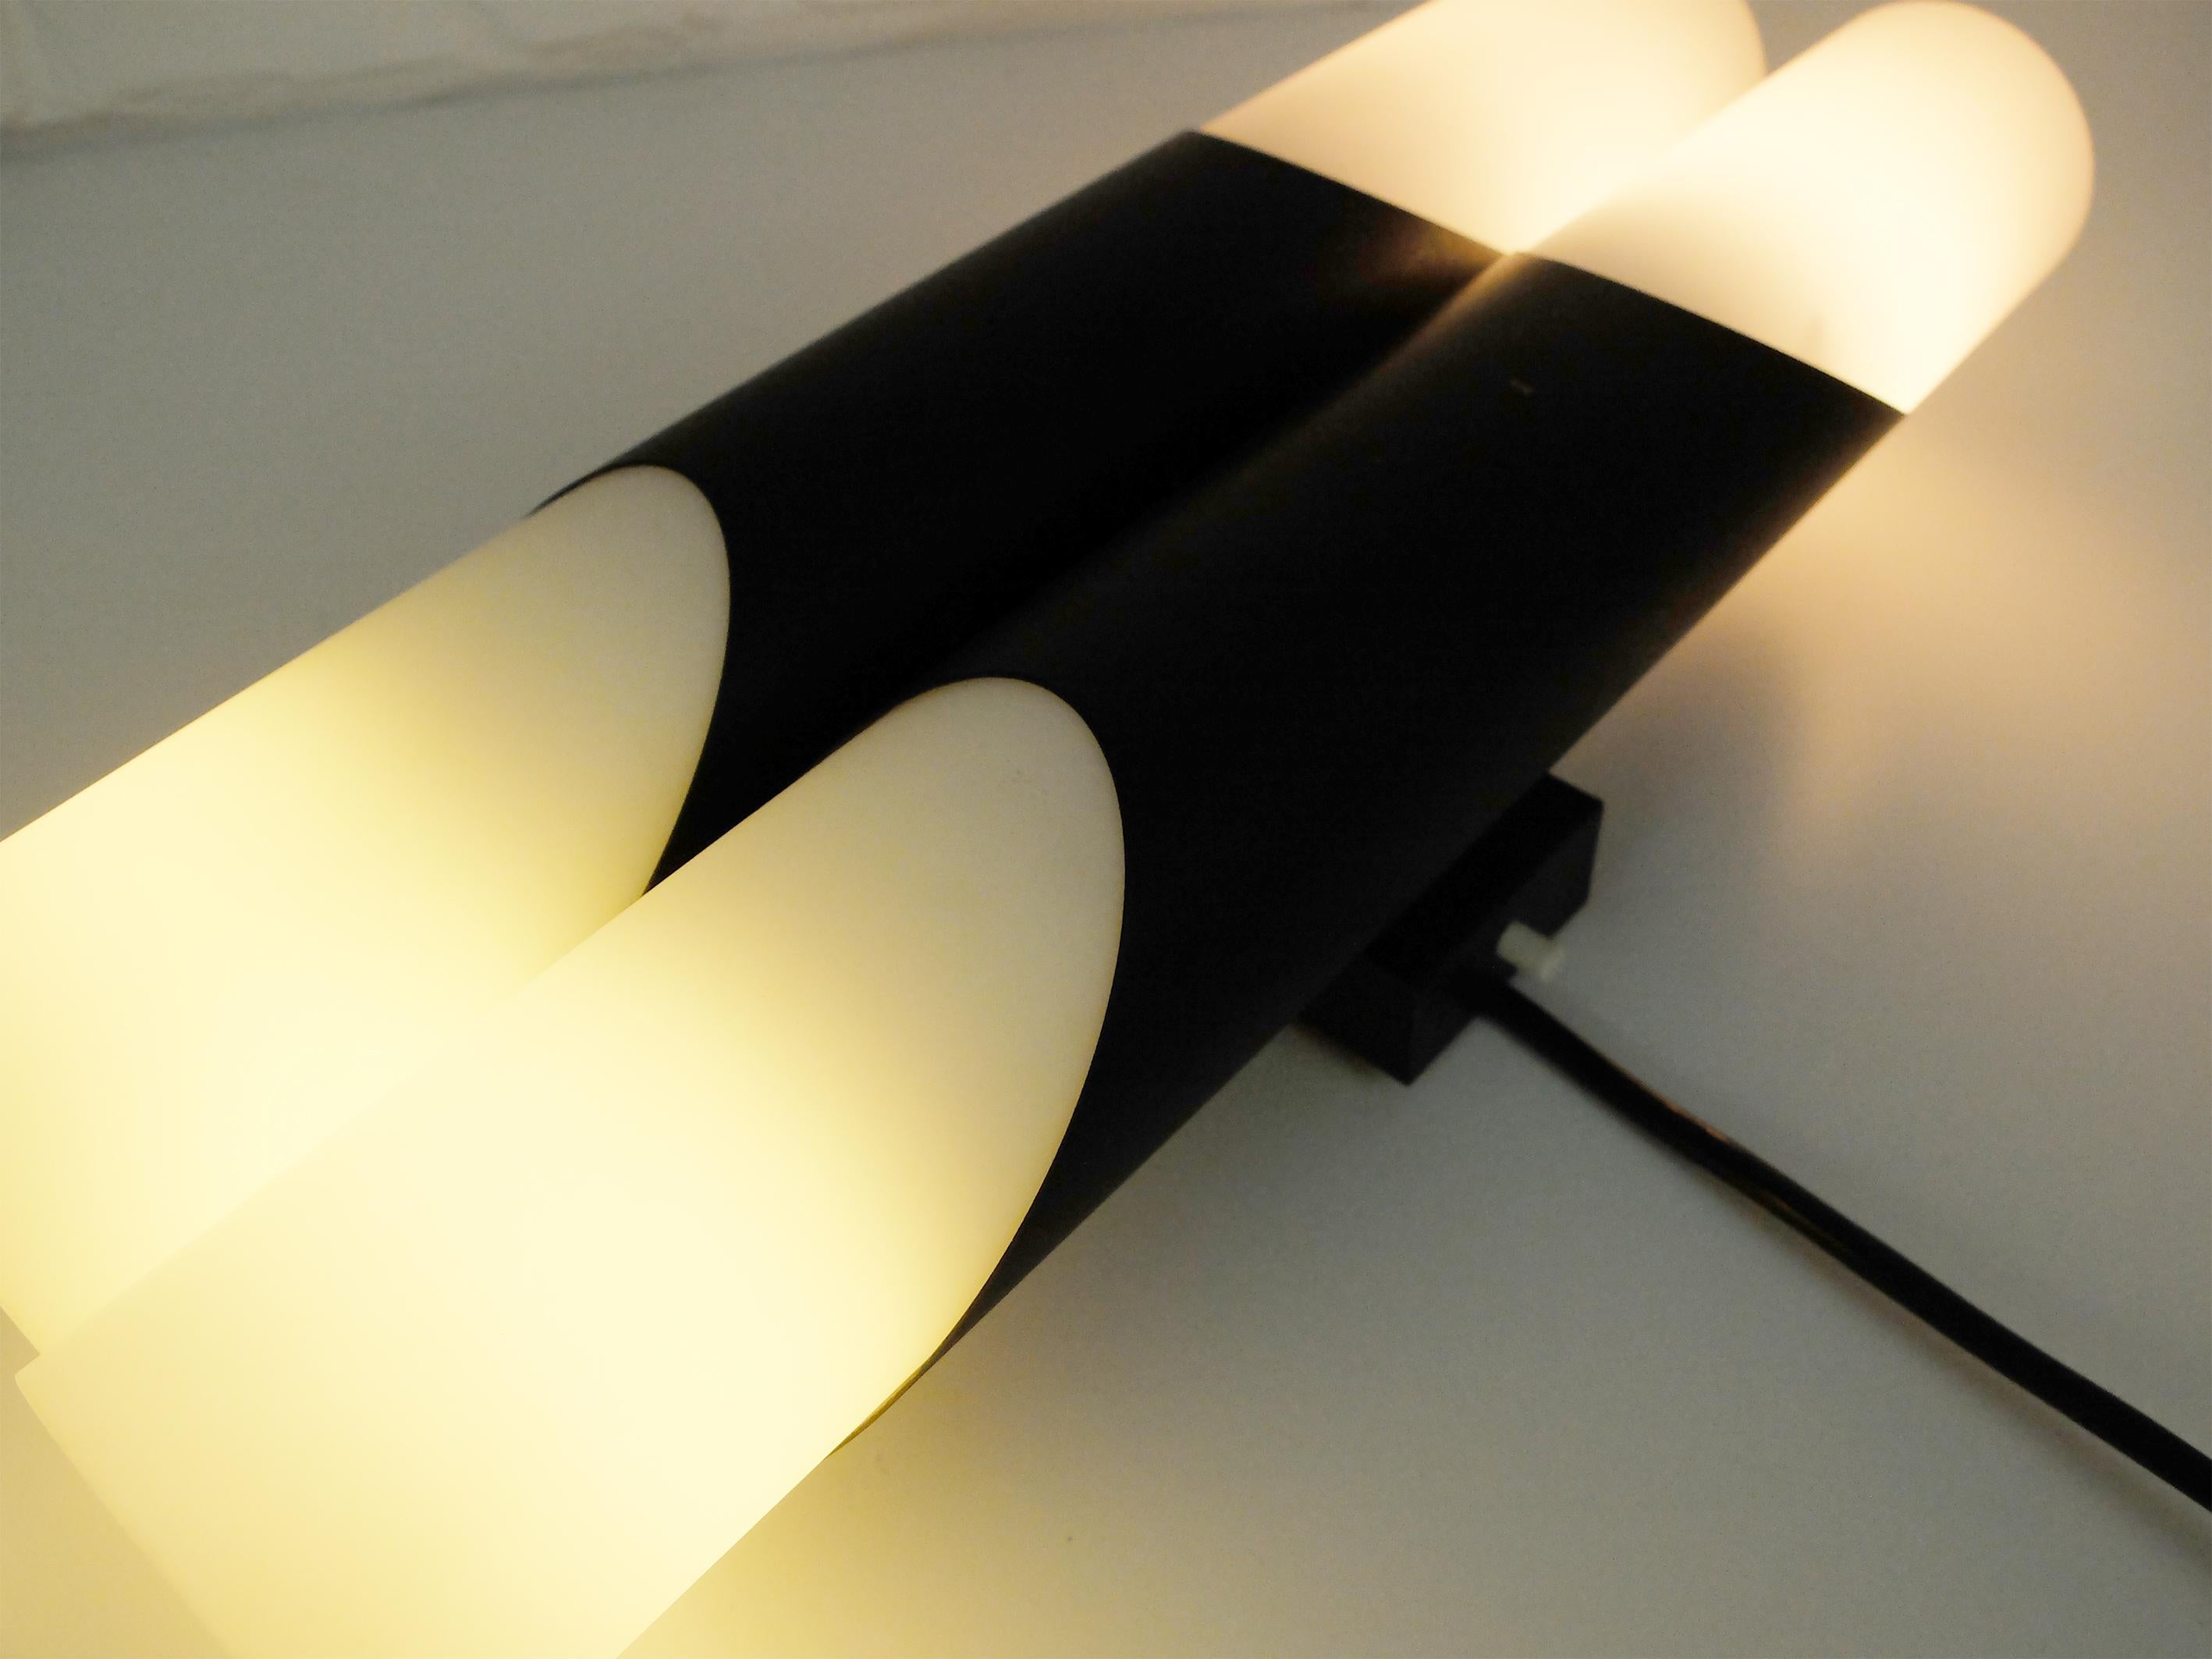 Metal Double Glass Wall Light in black by Rolf Krüger for Paul Neuhaus, Germany 1970 For Sale